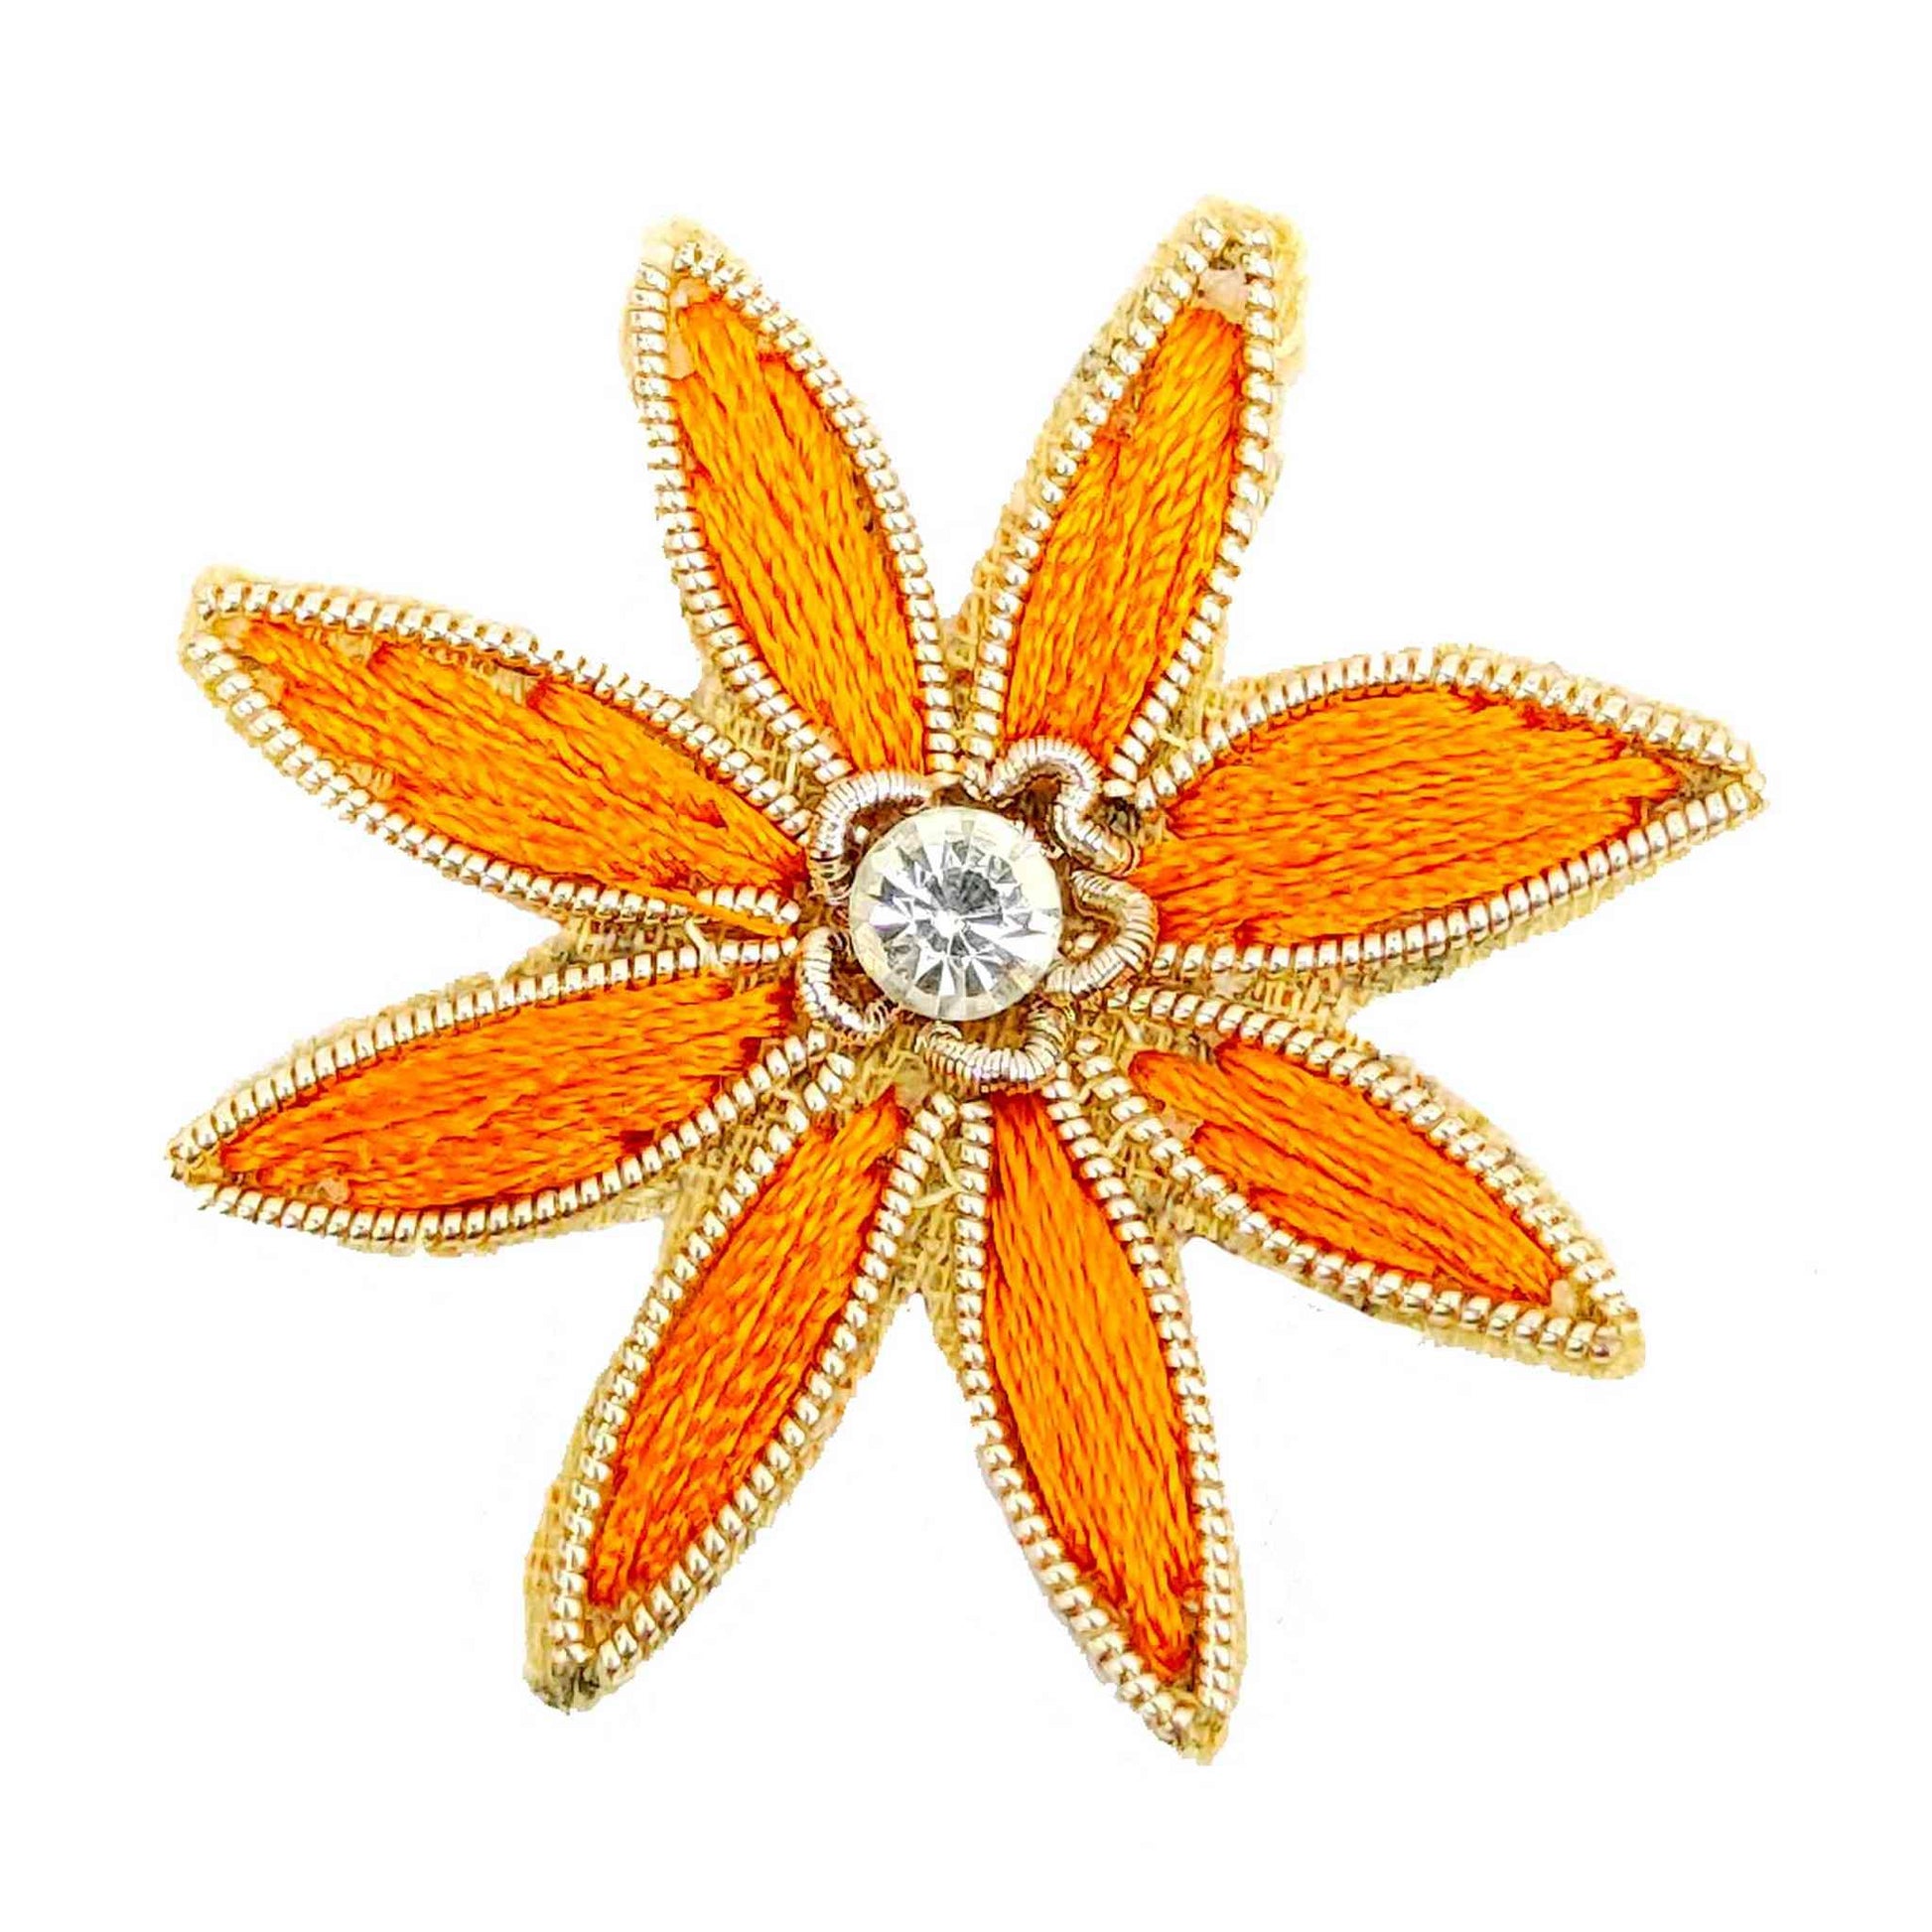 Threaded Strar Style Buti for DIY Craft, Trousseau Packing or Decoration (Bunch of 12) - Design 215, Orange - Indian Petals